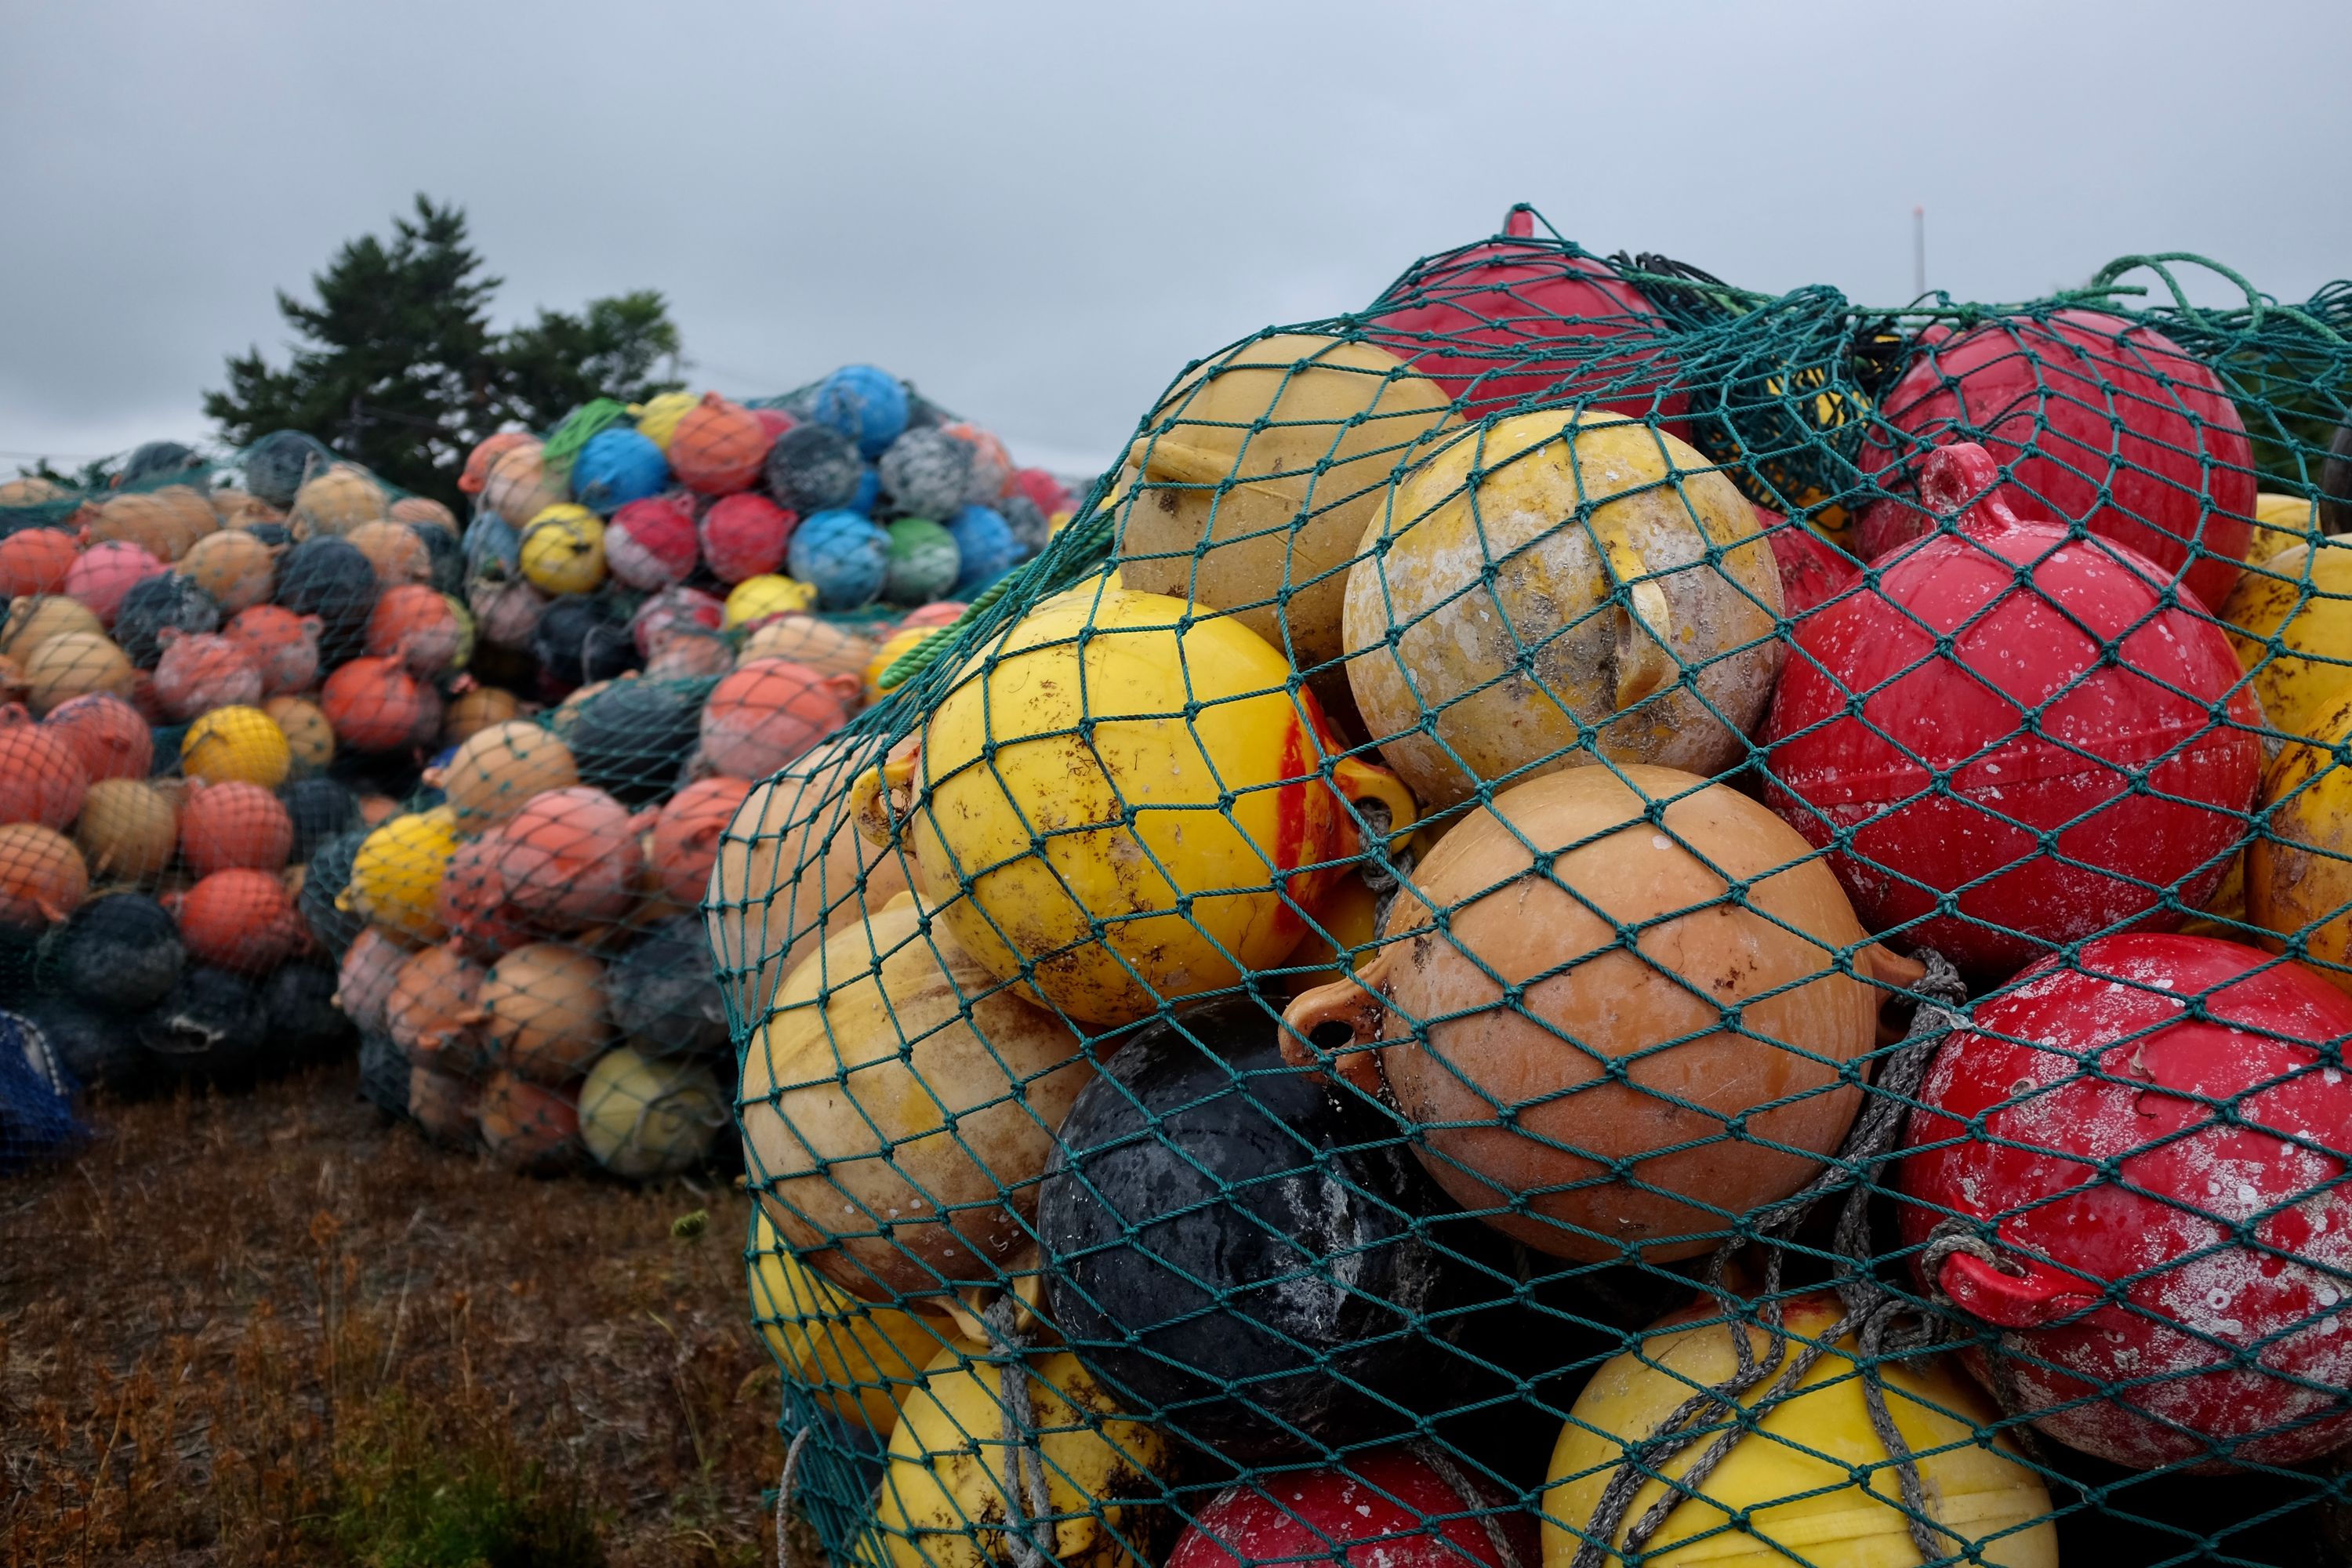 Colorful fishing floats in large nets.